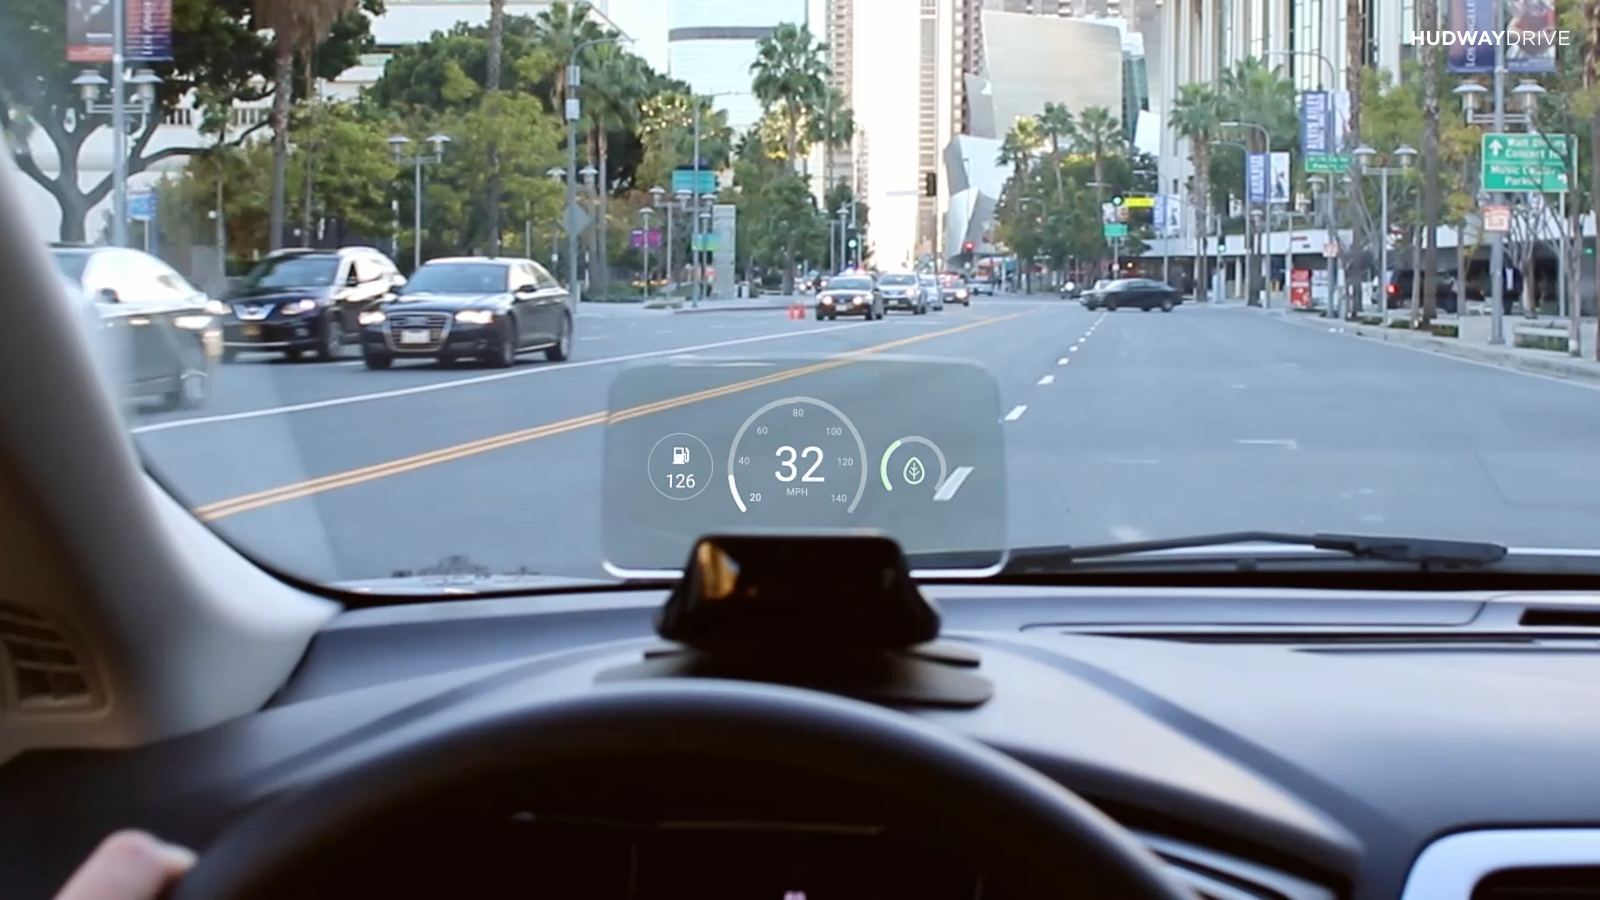 A head-up display for speed and fuel, mounted to a car dashboard